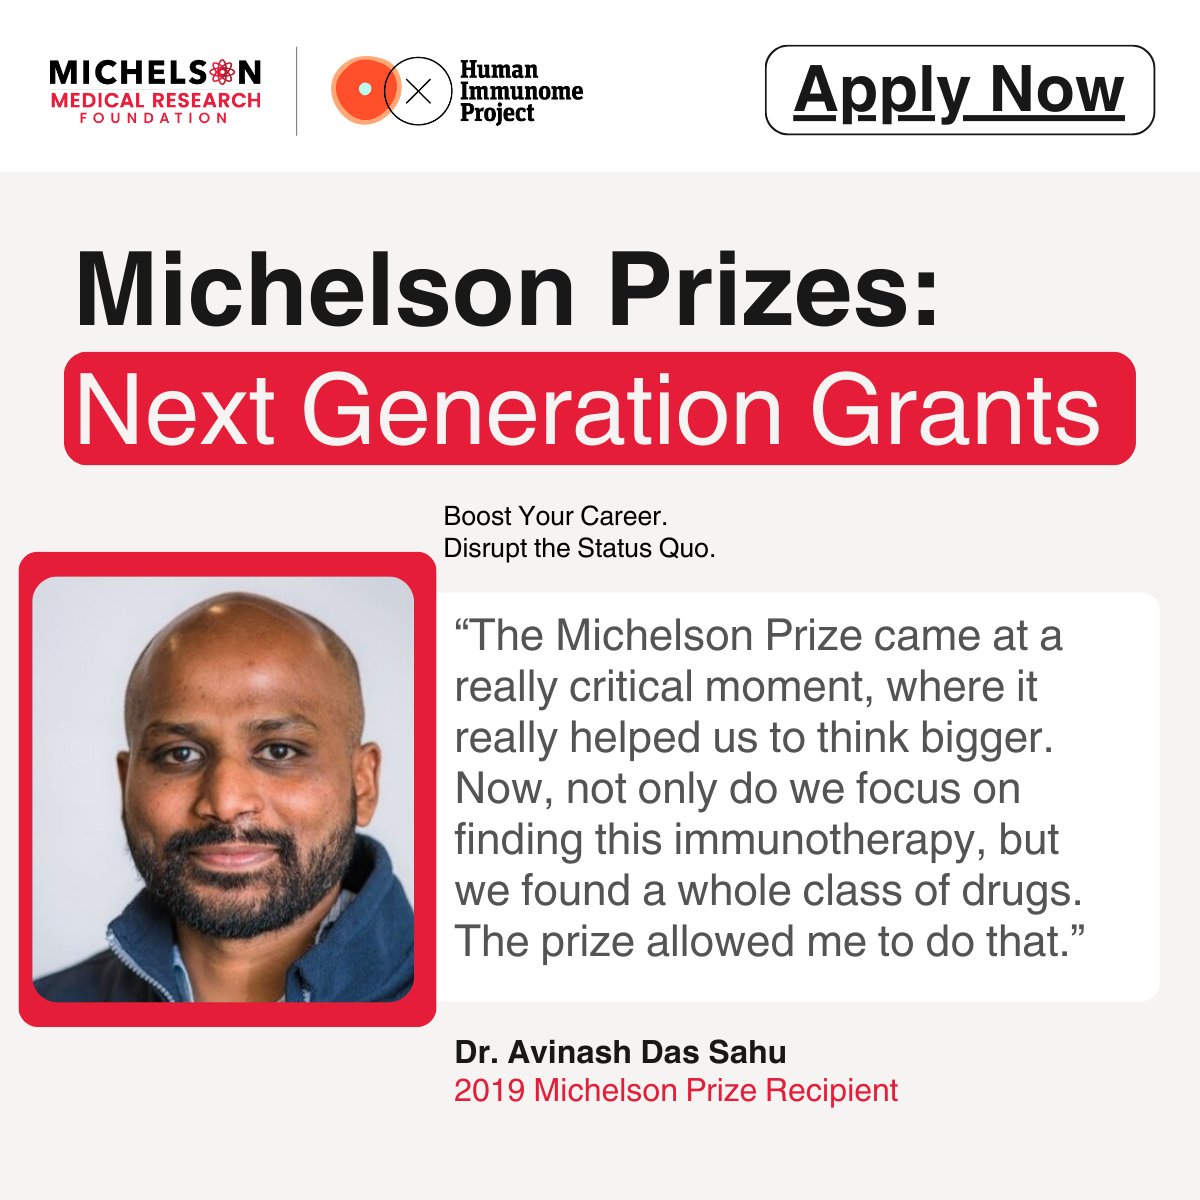 Can AI deep-learning frameworks empower new strategies for cancer immunotherapy? Dr. Avinash Das Sahu investigated that very question with his 2019 #MichelsonPrizes: Next Generation Grant. Apply today: michelsonprizes.smapply.org @ImmunomePro